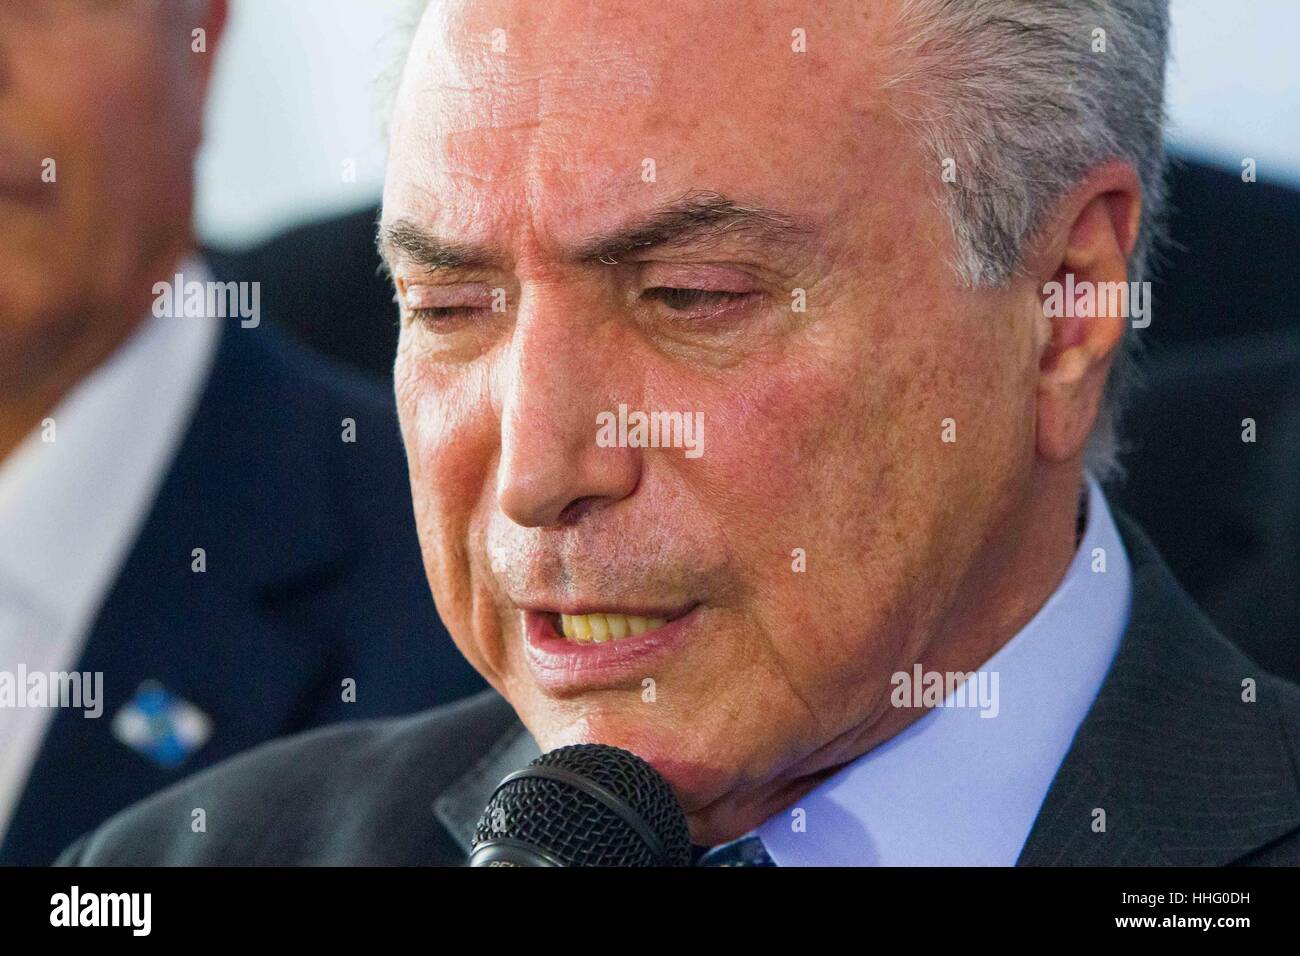 RIBEIRÃO PRETO, SP - 19.01.2017: TEMER E ALCKMIN LANÇAM PLANO SAFRA - President of the Republic, Michel Temer, gives an interview during the launching ceremony of the &quot-Fundingding for the 2017/18 Harvest Plan&quot;  at tht the IAC (Agronomic Institute of Camp) - Cana Cen Center in the city of Ribeirão Preto / SP (Photo: João Moura/Fotoarena) Stock Photo